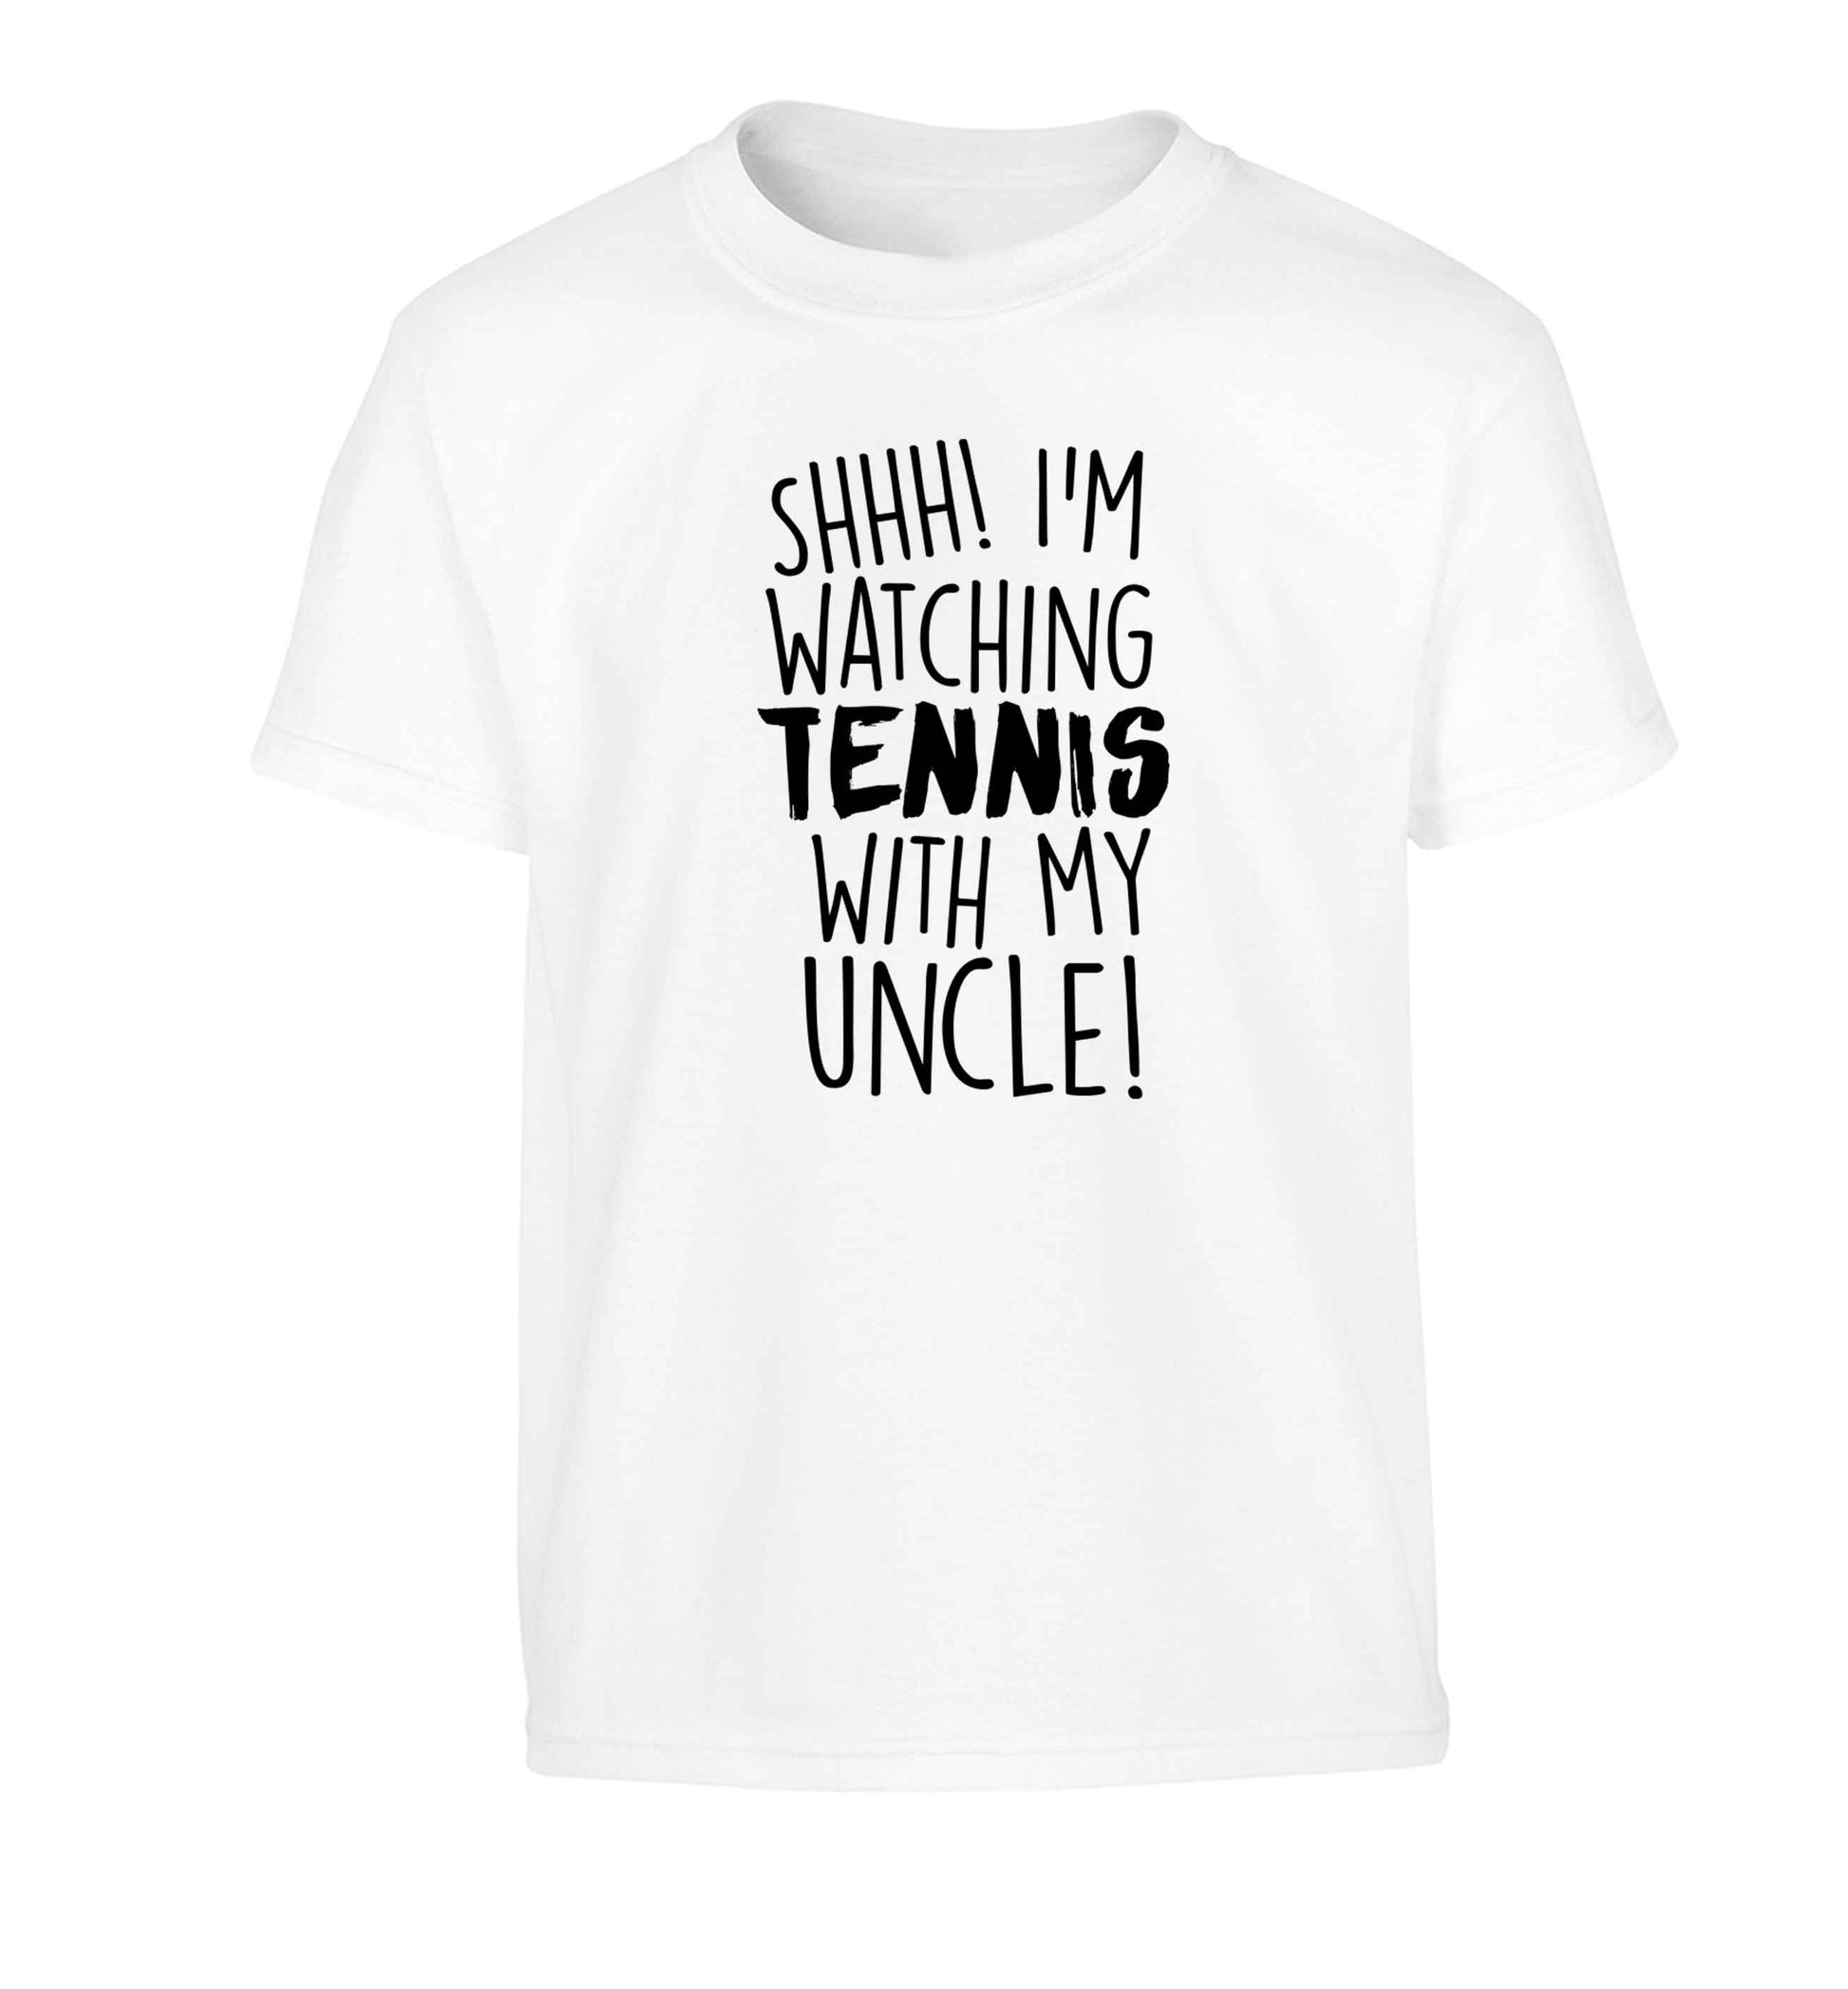 Shh! I'm watching tennis with my uncle! Children's white Tshirt 12-13 Years